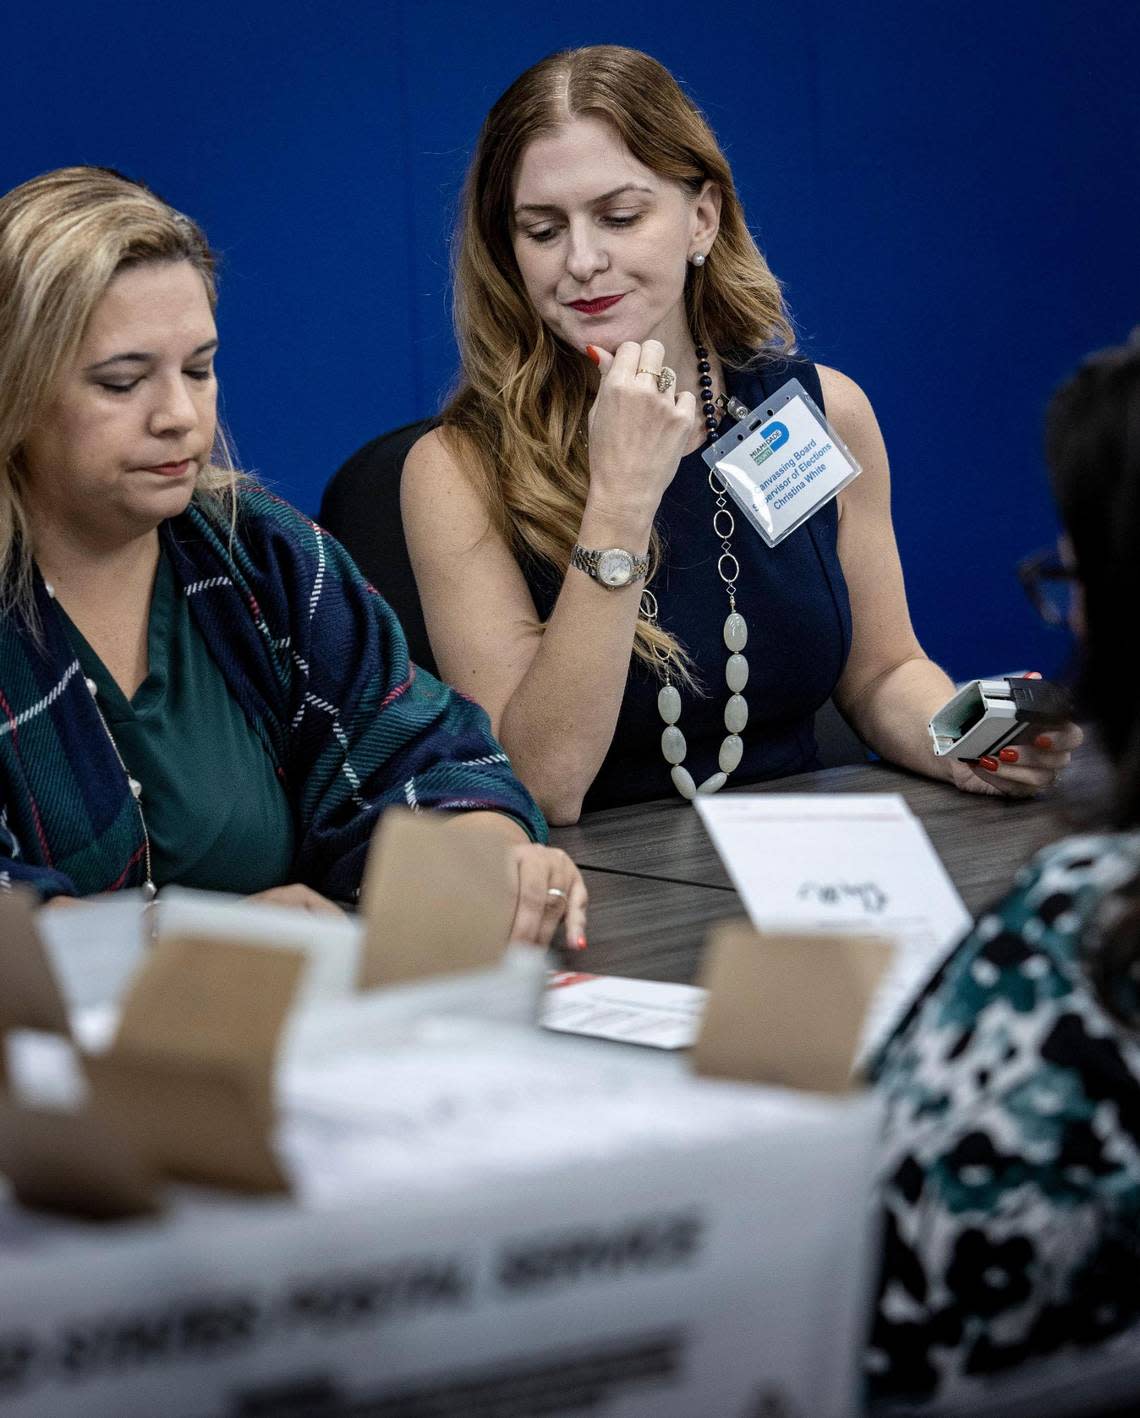 Miami-Dade County Supervisor of Elections Christina White, right, and Judge Victoria Ferrer carefully inspect the signature on a vote-by-mail ballot at the Miami-Dade County Elections Department in Doral where the Canvassing Board met on Oct. 20, 2022.